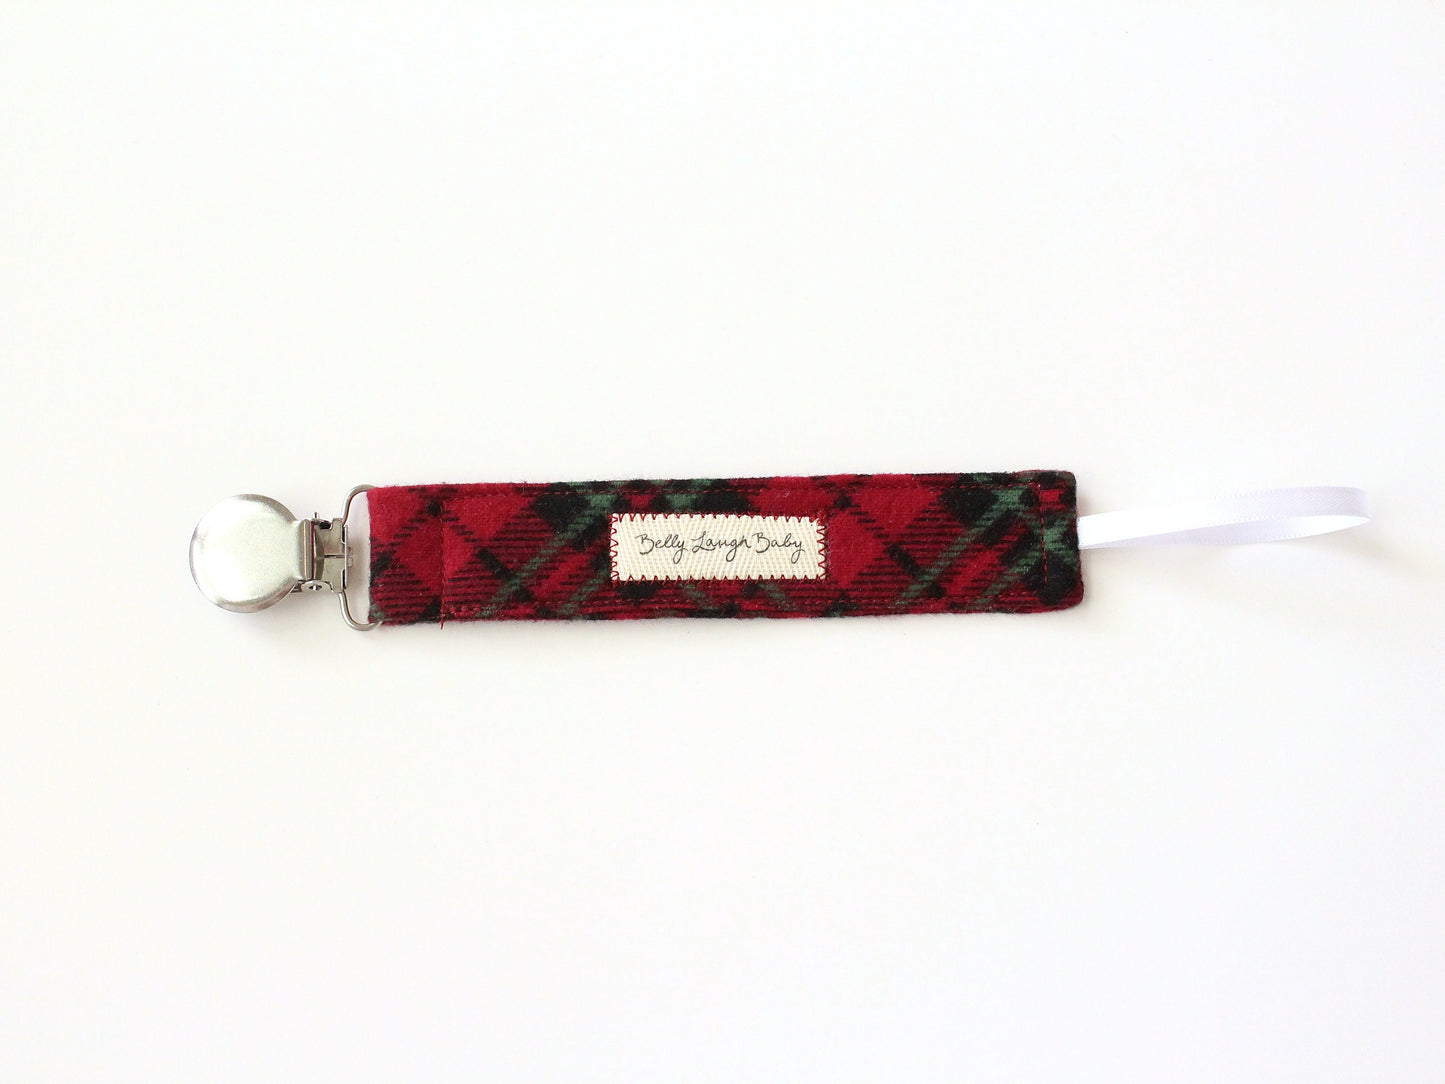 Red and Green Plaid Fabric Pacifier Clip | Gender Neutral Baby Gift | Soother Leash Binky Holder | CPSC Compliant